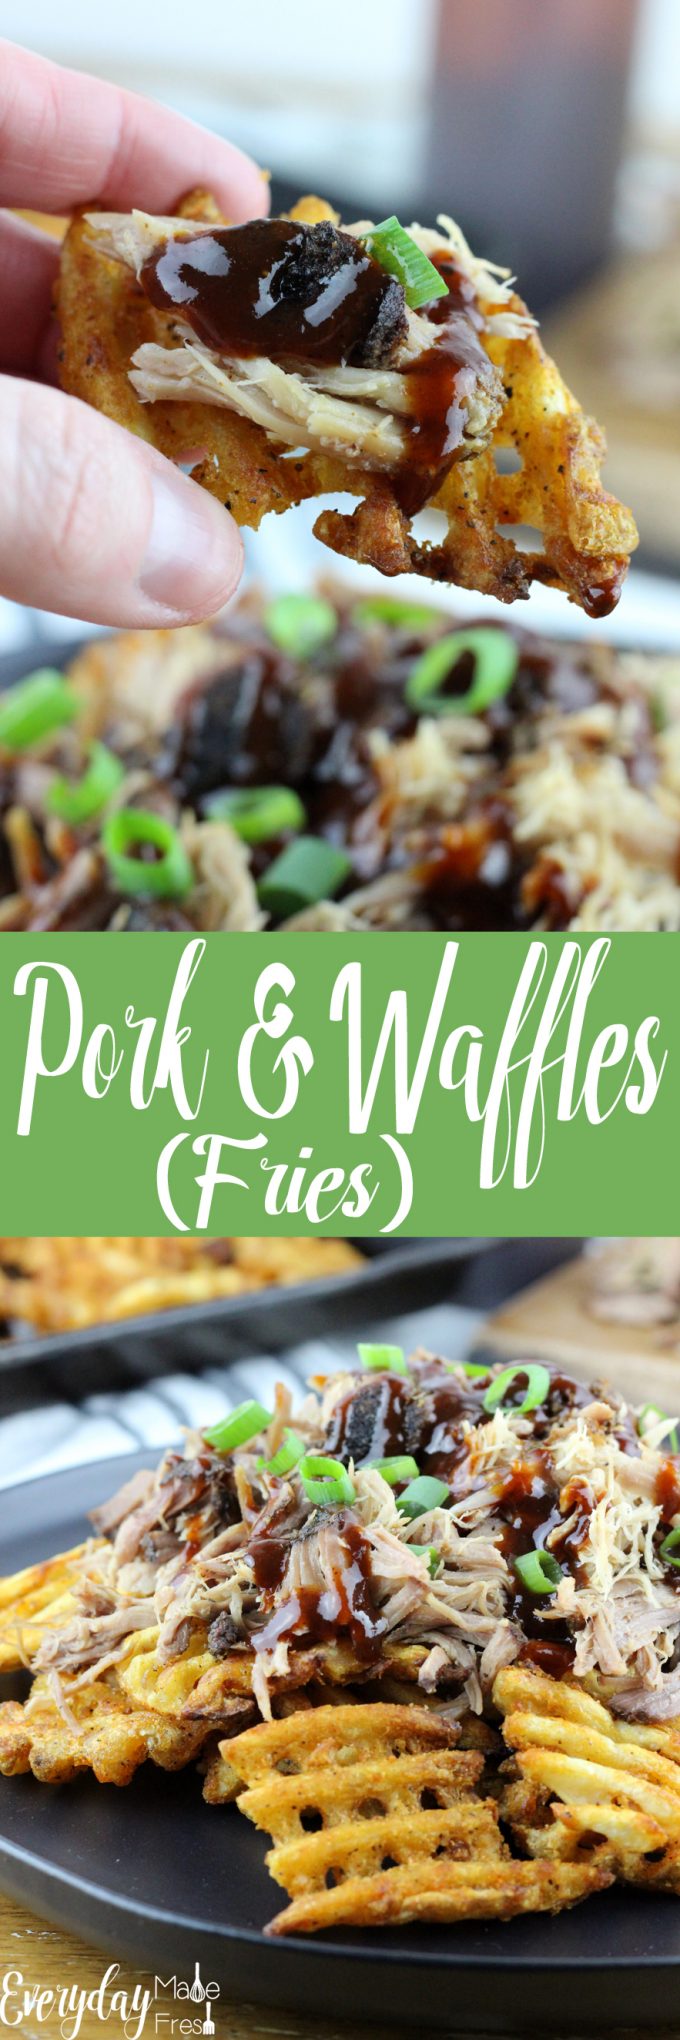 Pork & Waffles is our take on the world famous BBQ Butt Fries.  Waffle fries are the perfect vessel for slow cooked pulled pork, drizzled in BBQ sauce, and topped with fresh scallions.  | EverydayMadeFresh.com